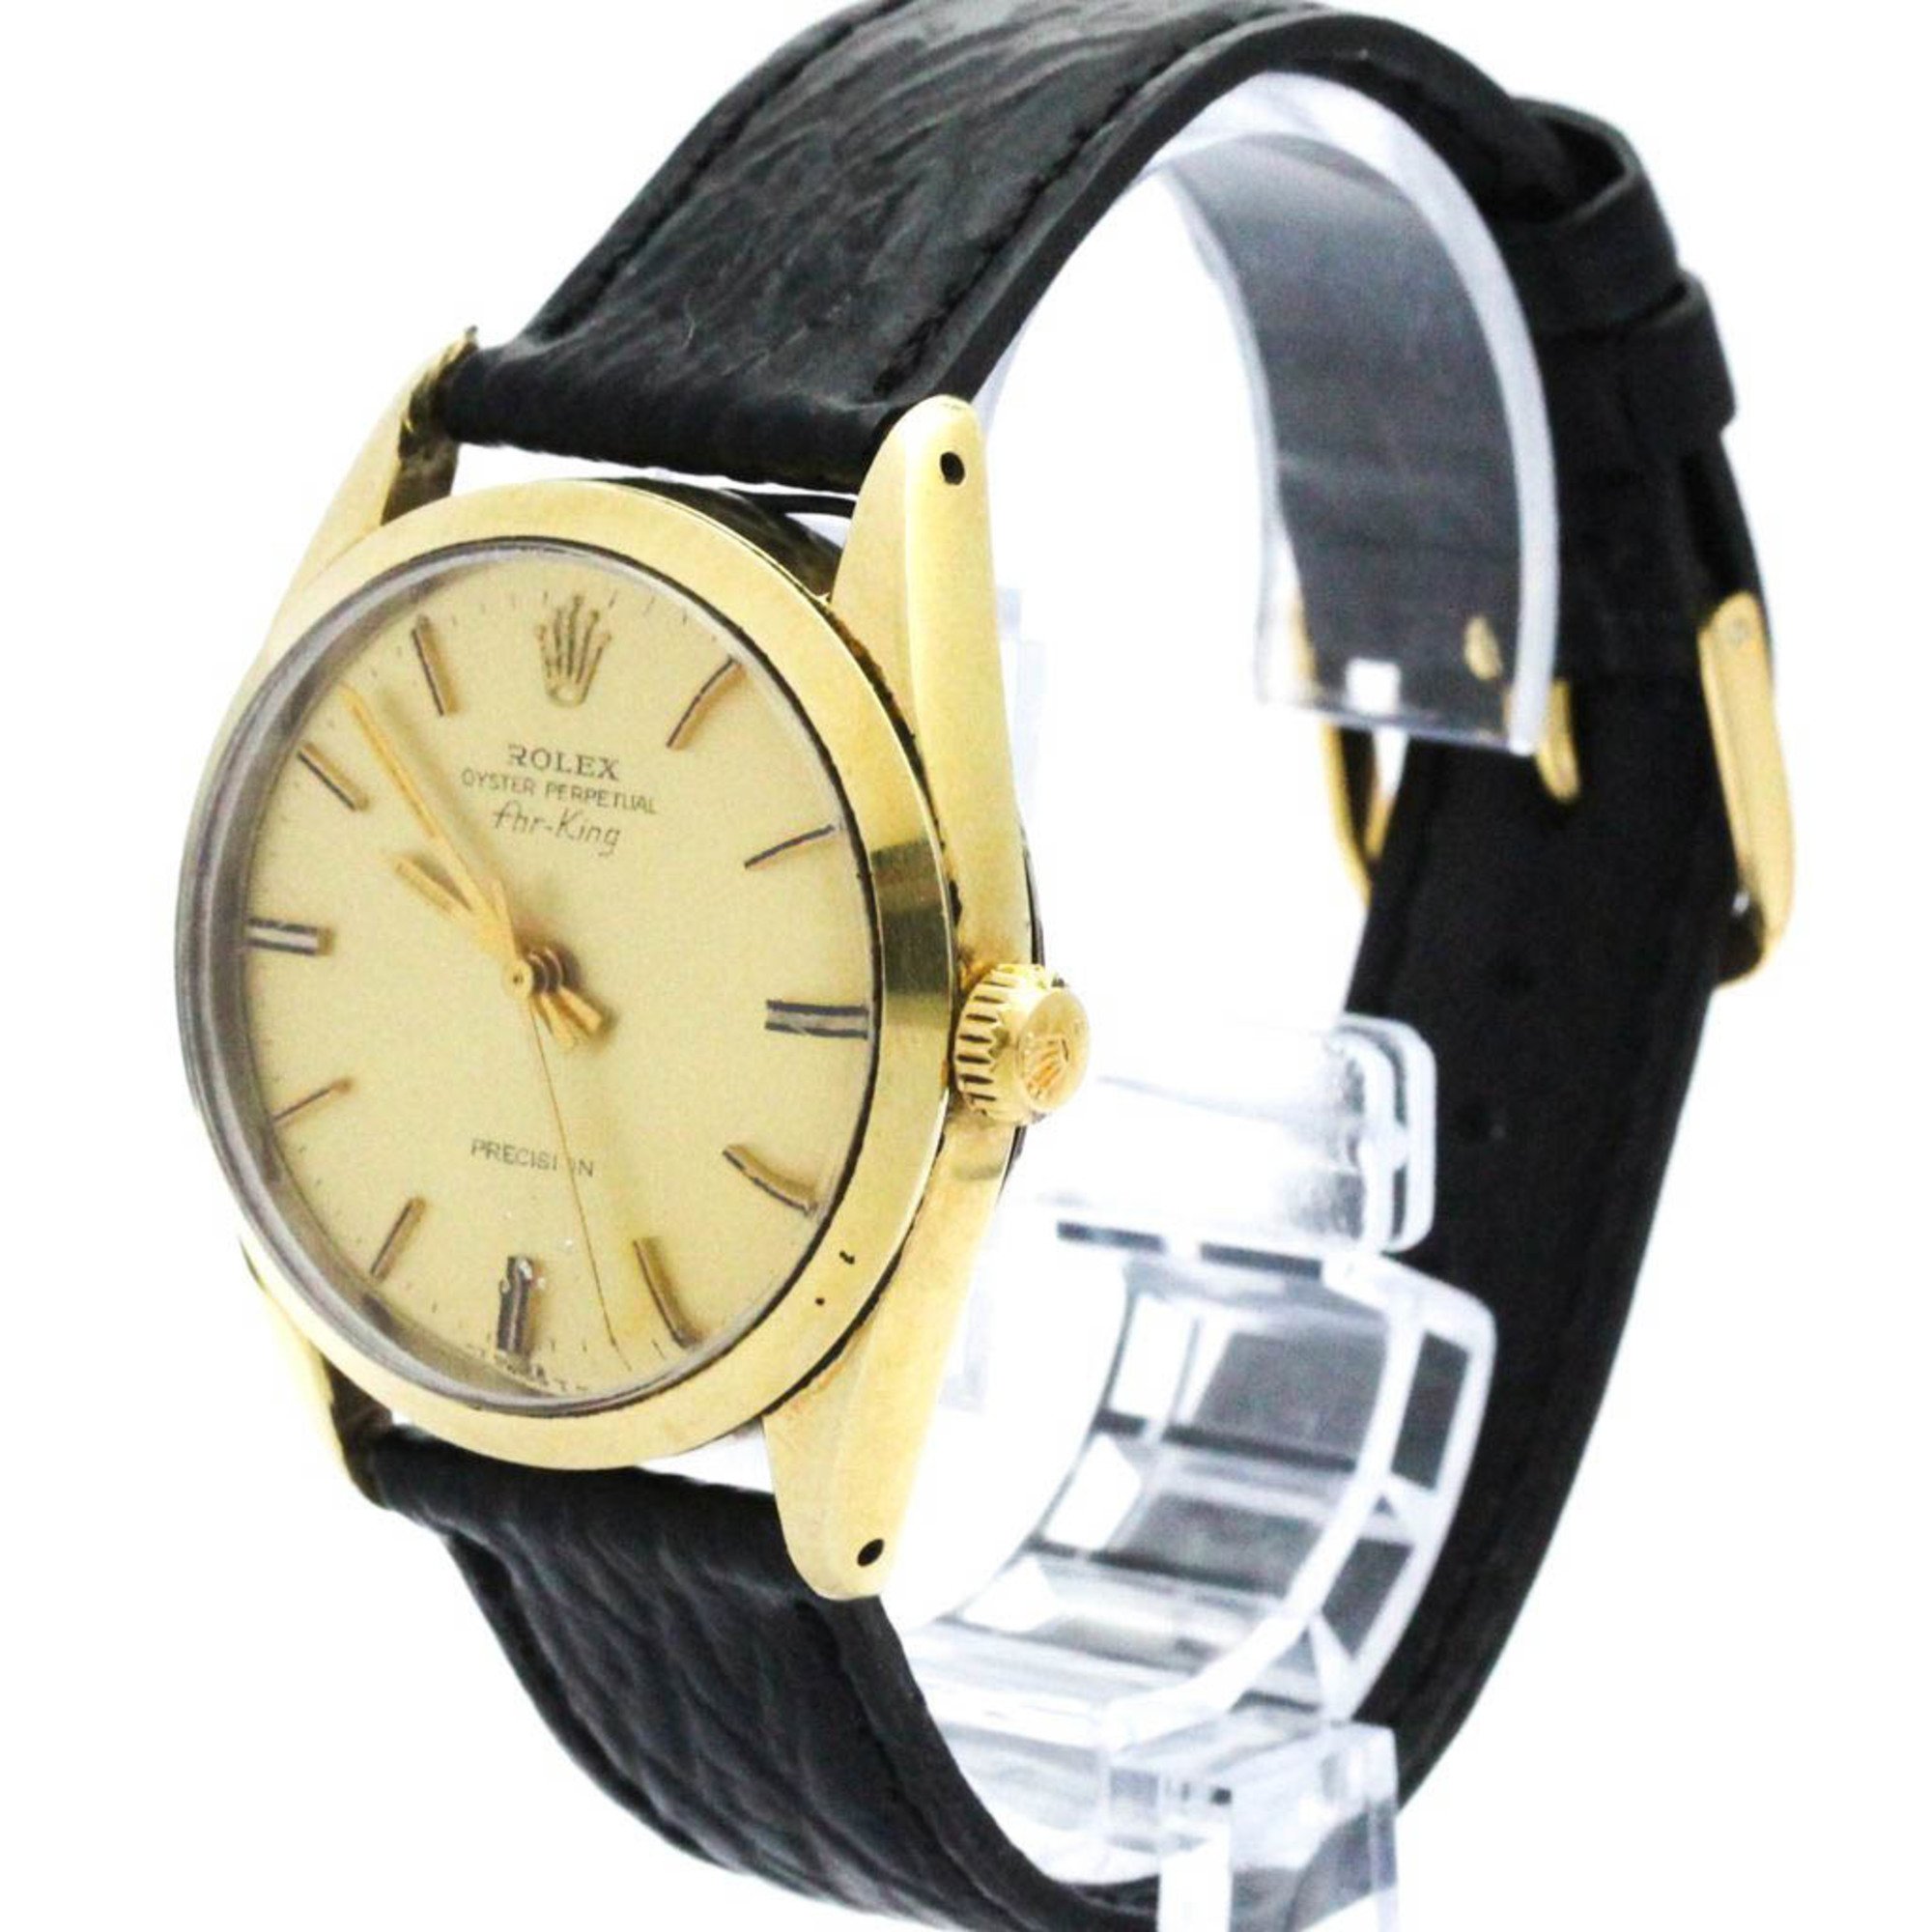 Vintage ROLEX Air King 5520 Gold Plated Leather Automatic Mens Watch BF571664